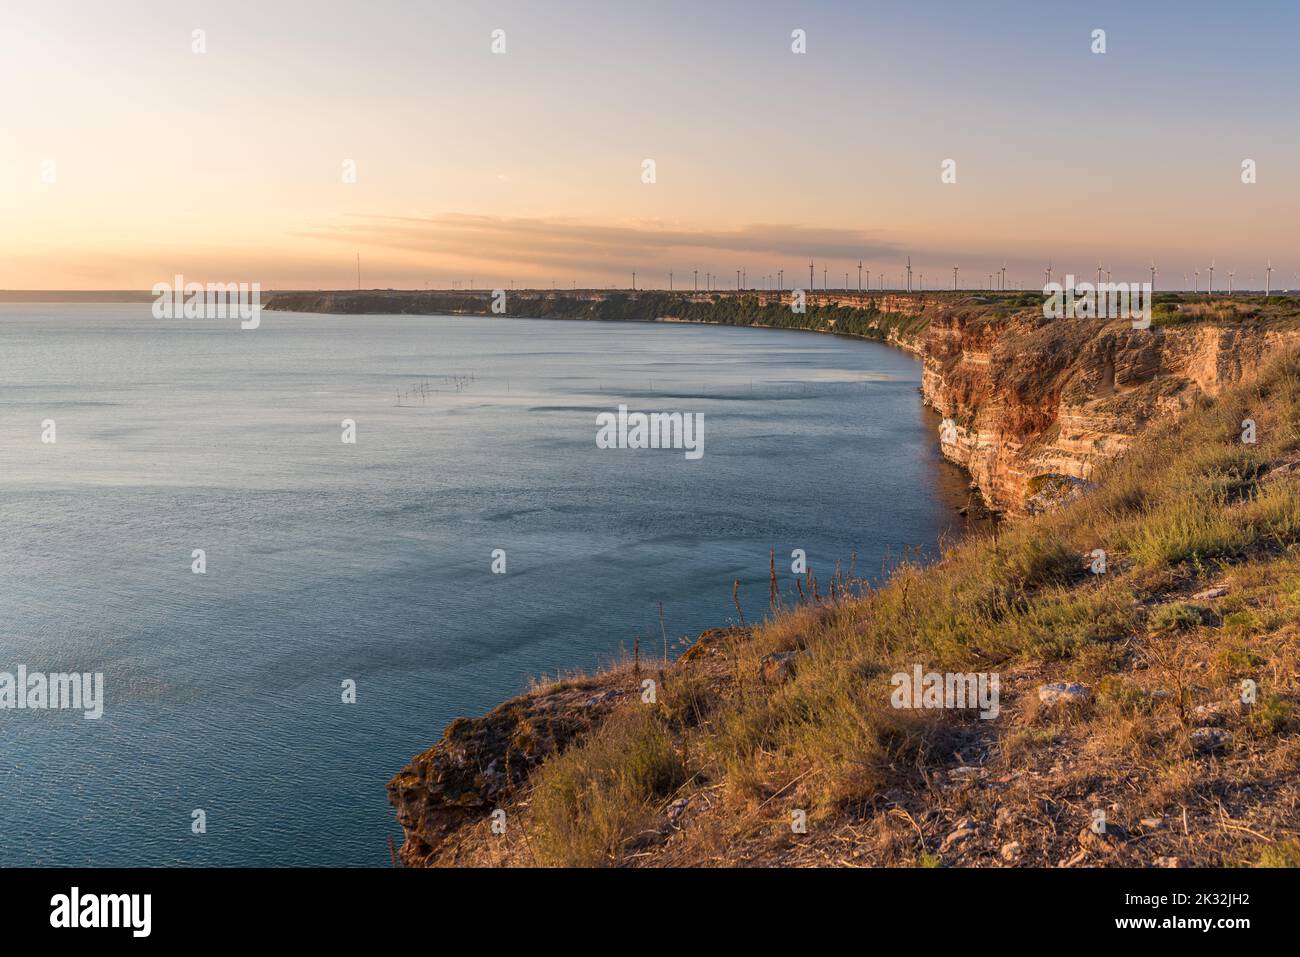 Scenic view of Black Sea at Cape Kaliakra at golden hour Stock Photo